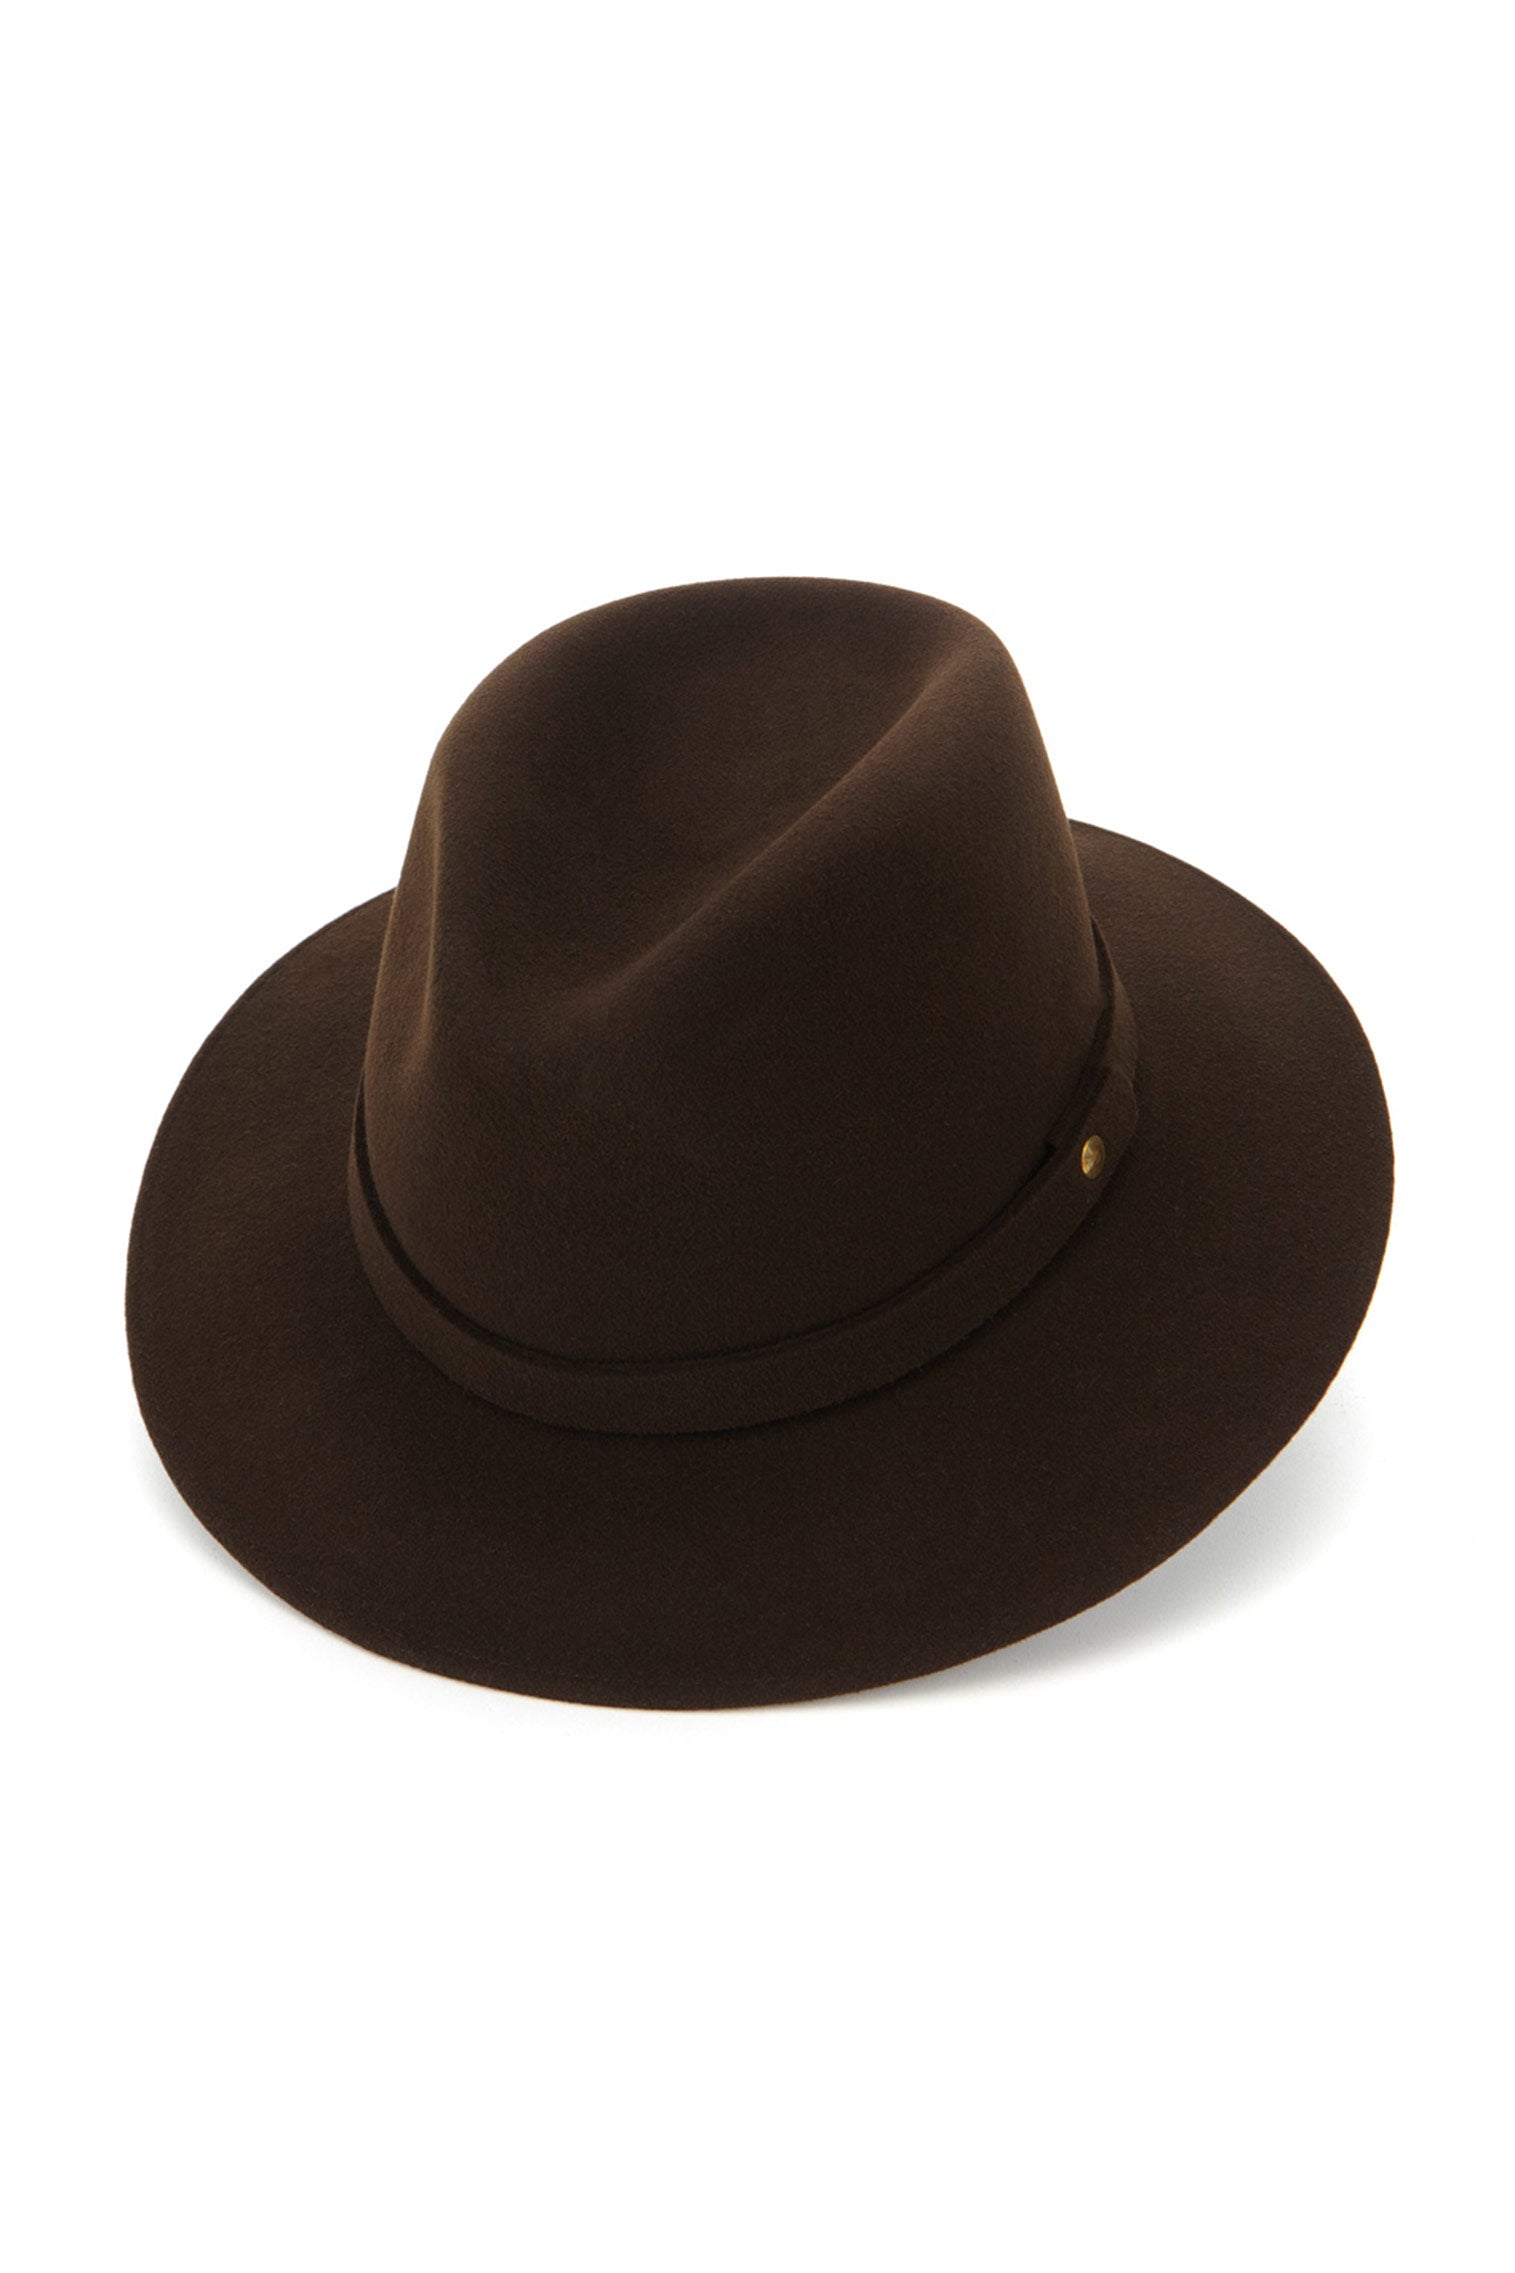 Nomad Rollable Trilby - Men's Hats - Lock & Co. Hatters London UK